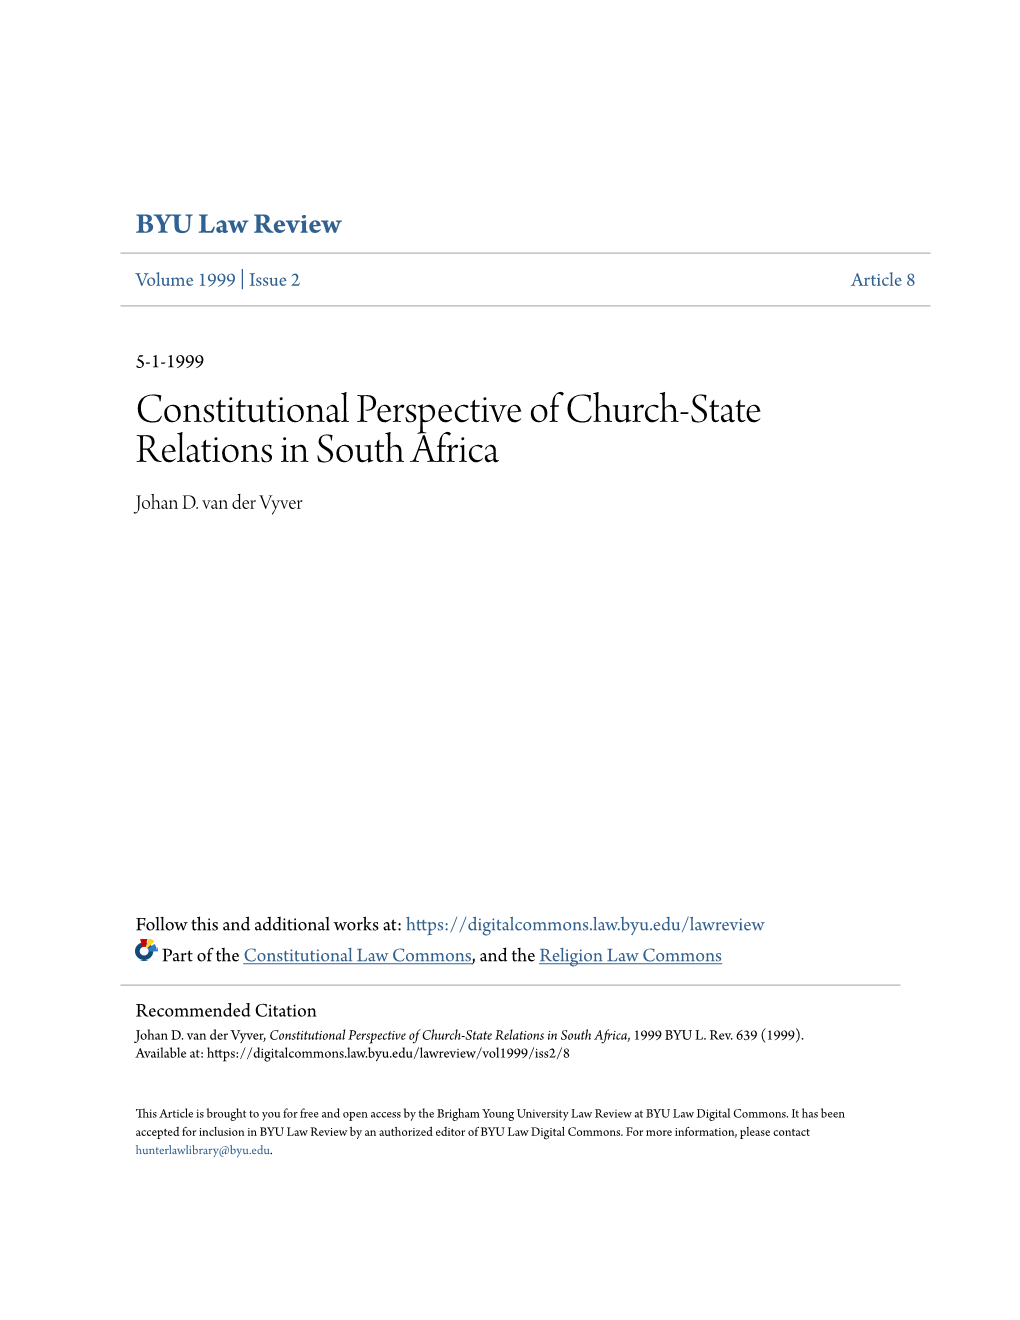 Constitutional Perspective of Church-State Relations in South Africa Johan D